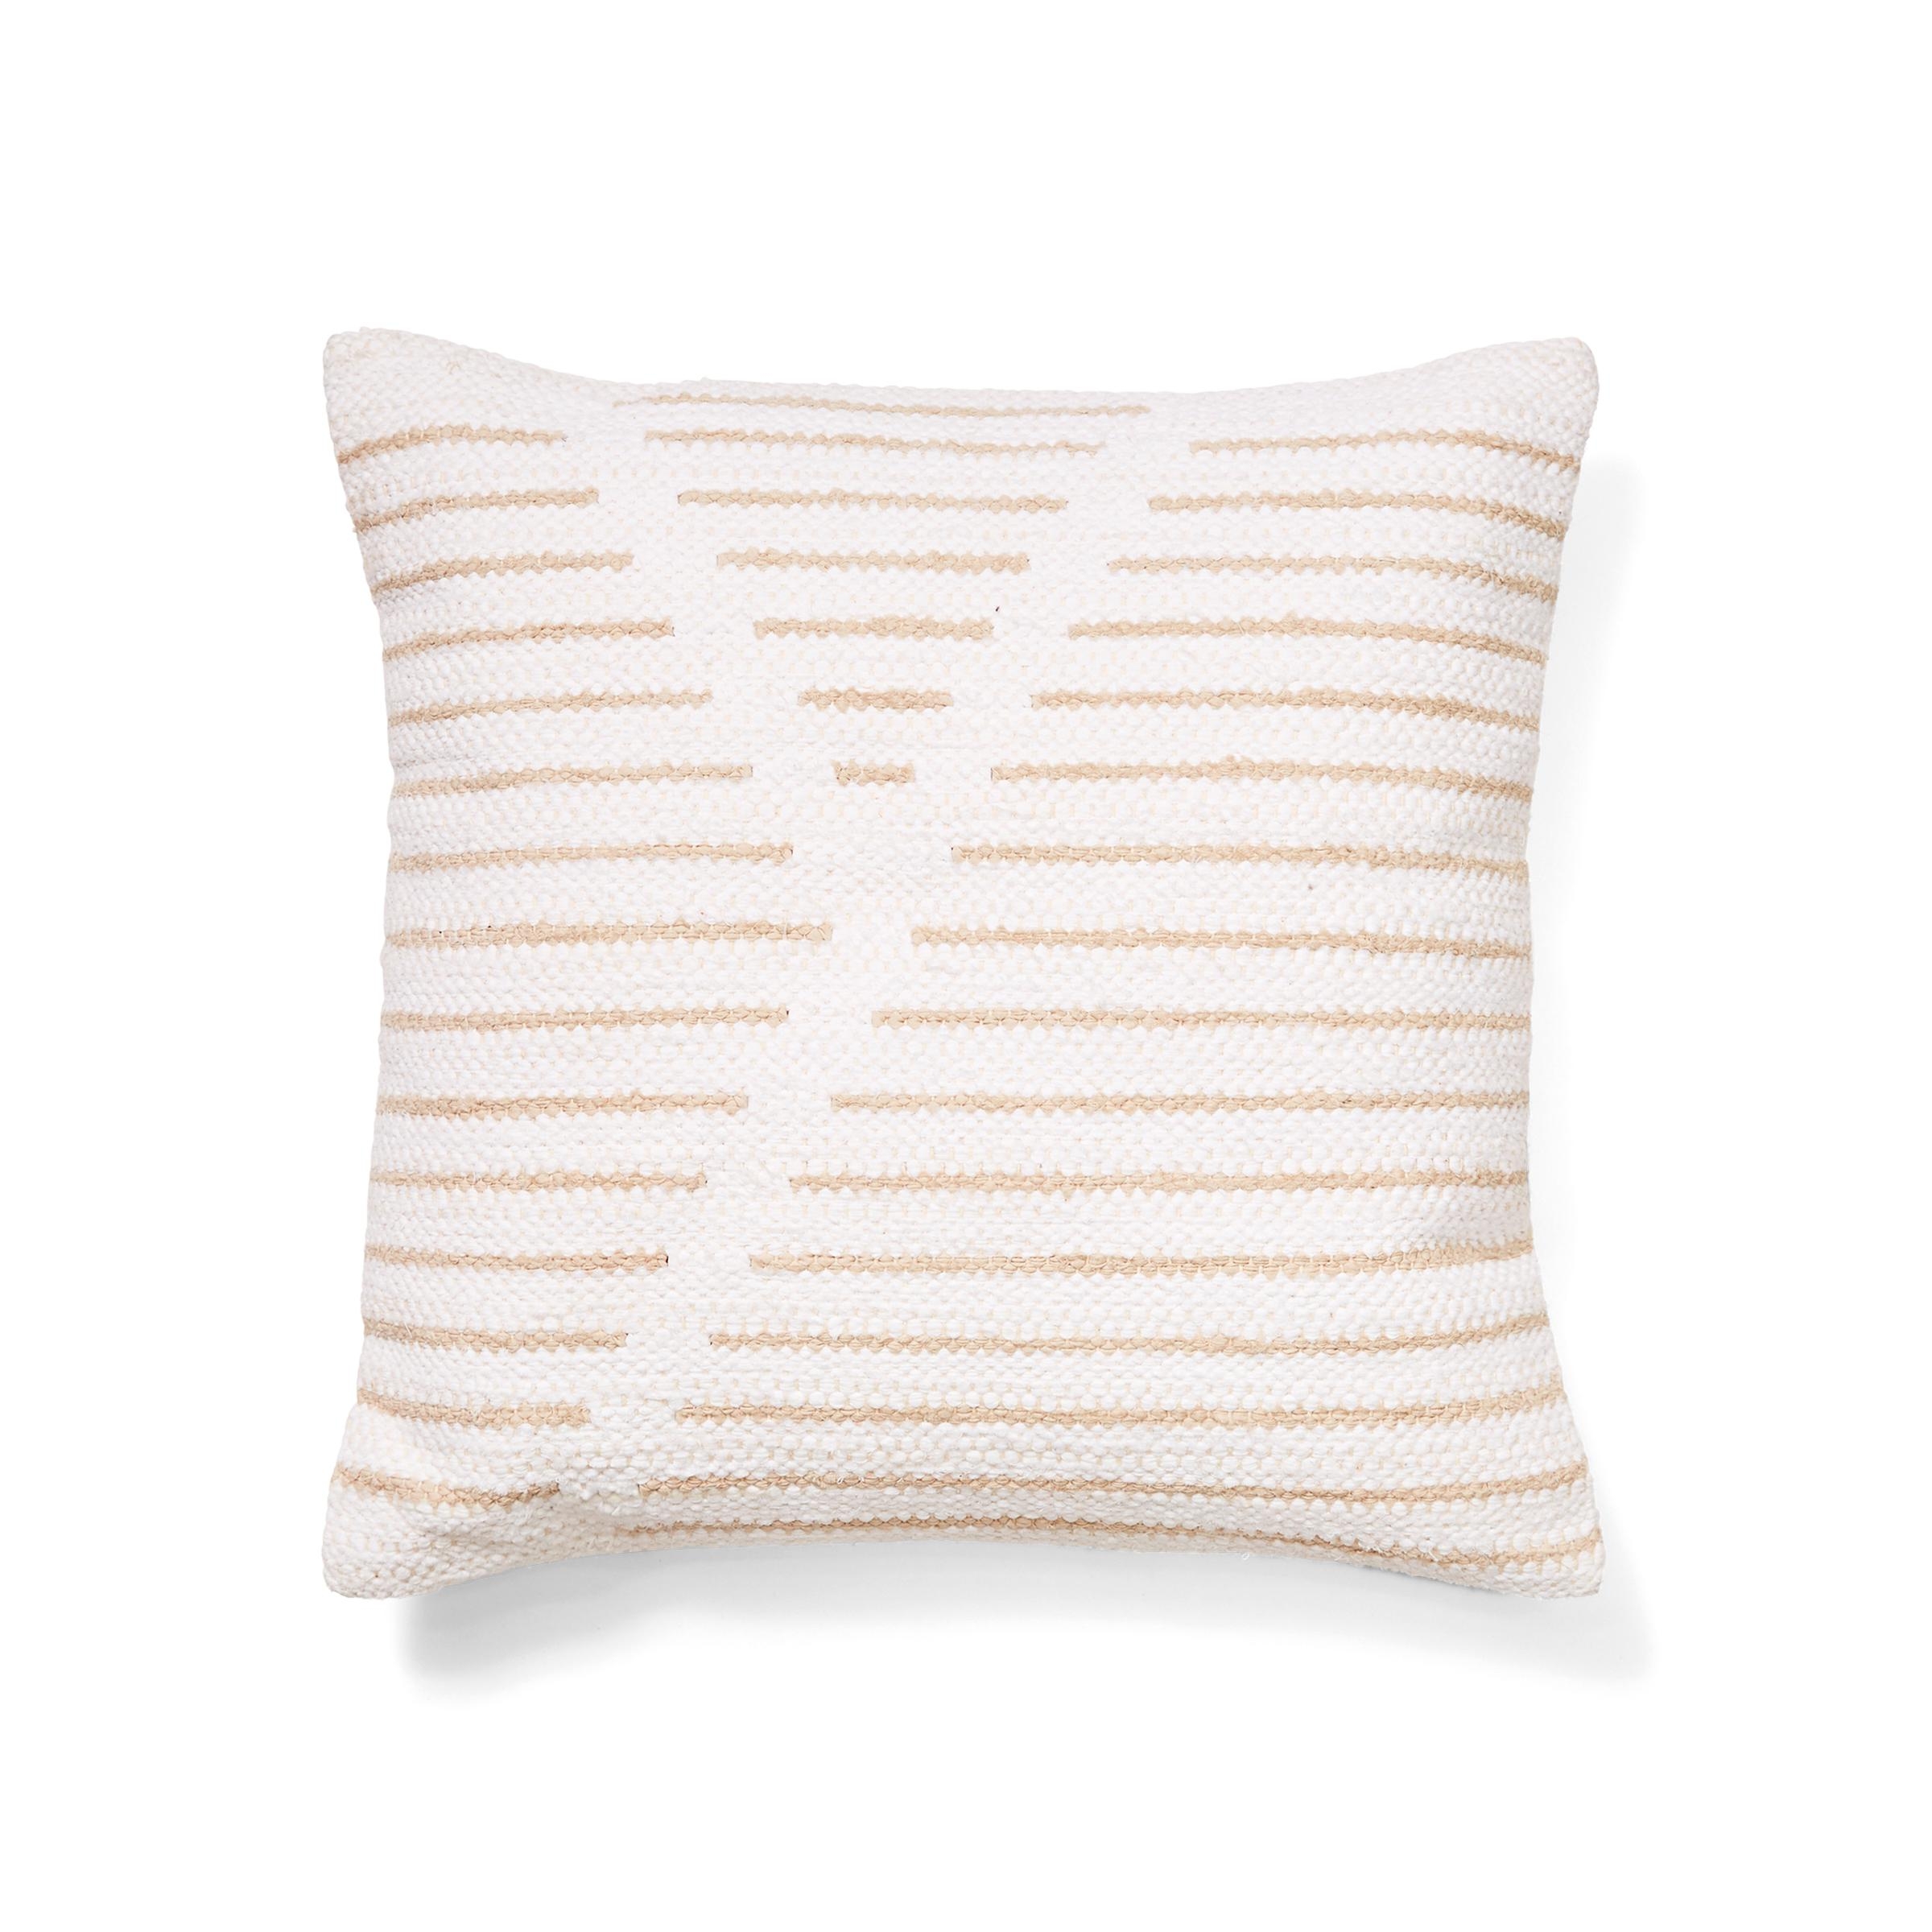 Woven Array Pillow Cover in White - Image 0